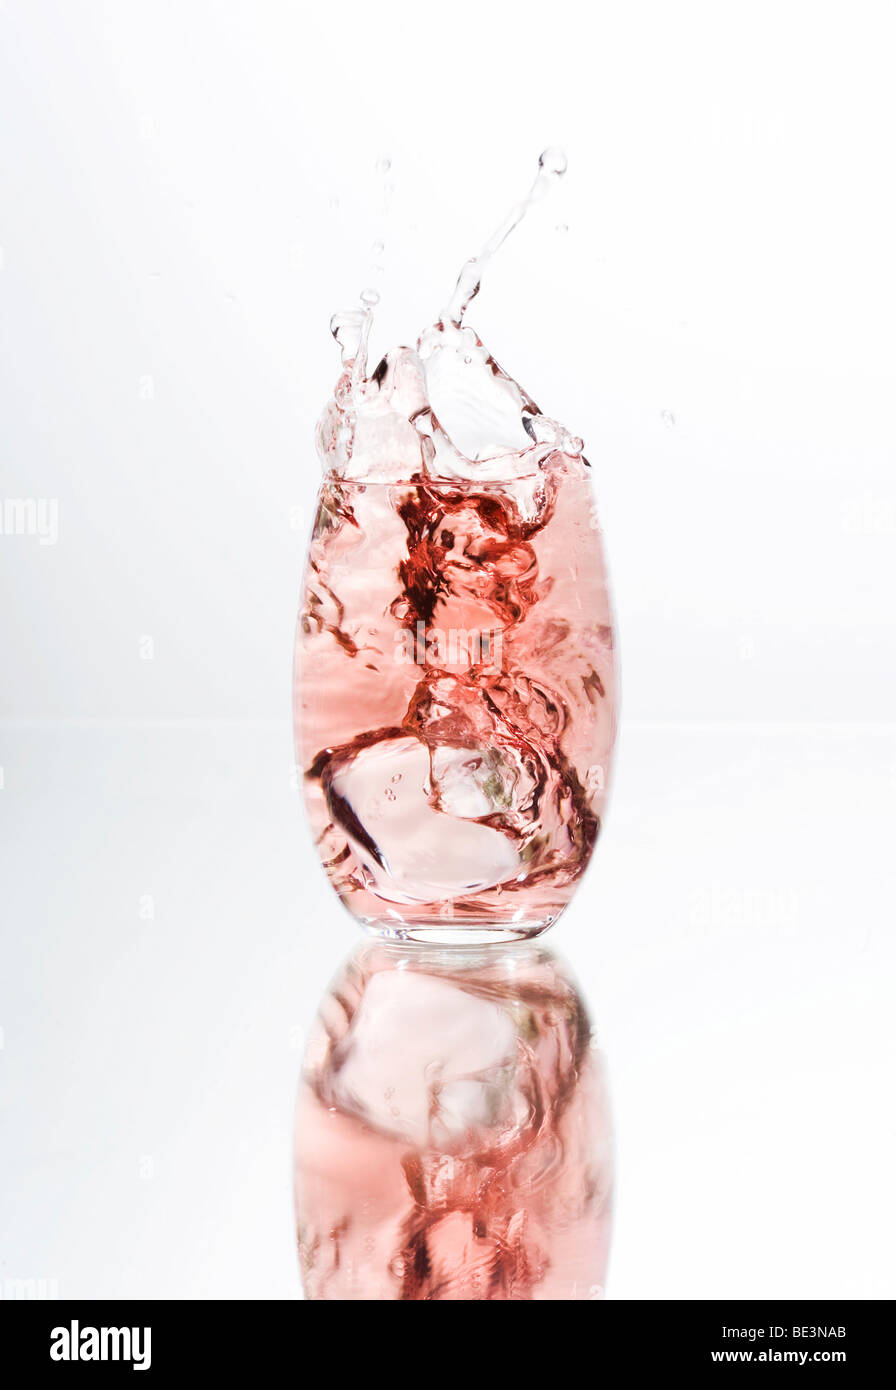 Ice cube falling in a glass of red liquid, juice, cocktail Stock Photo